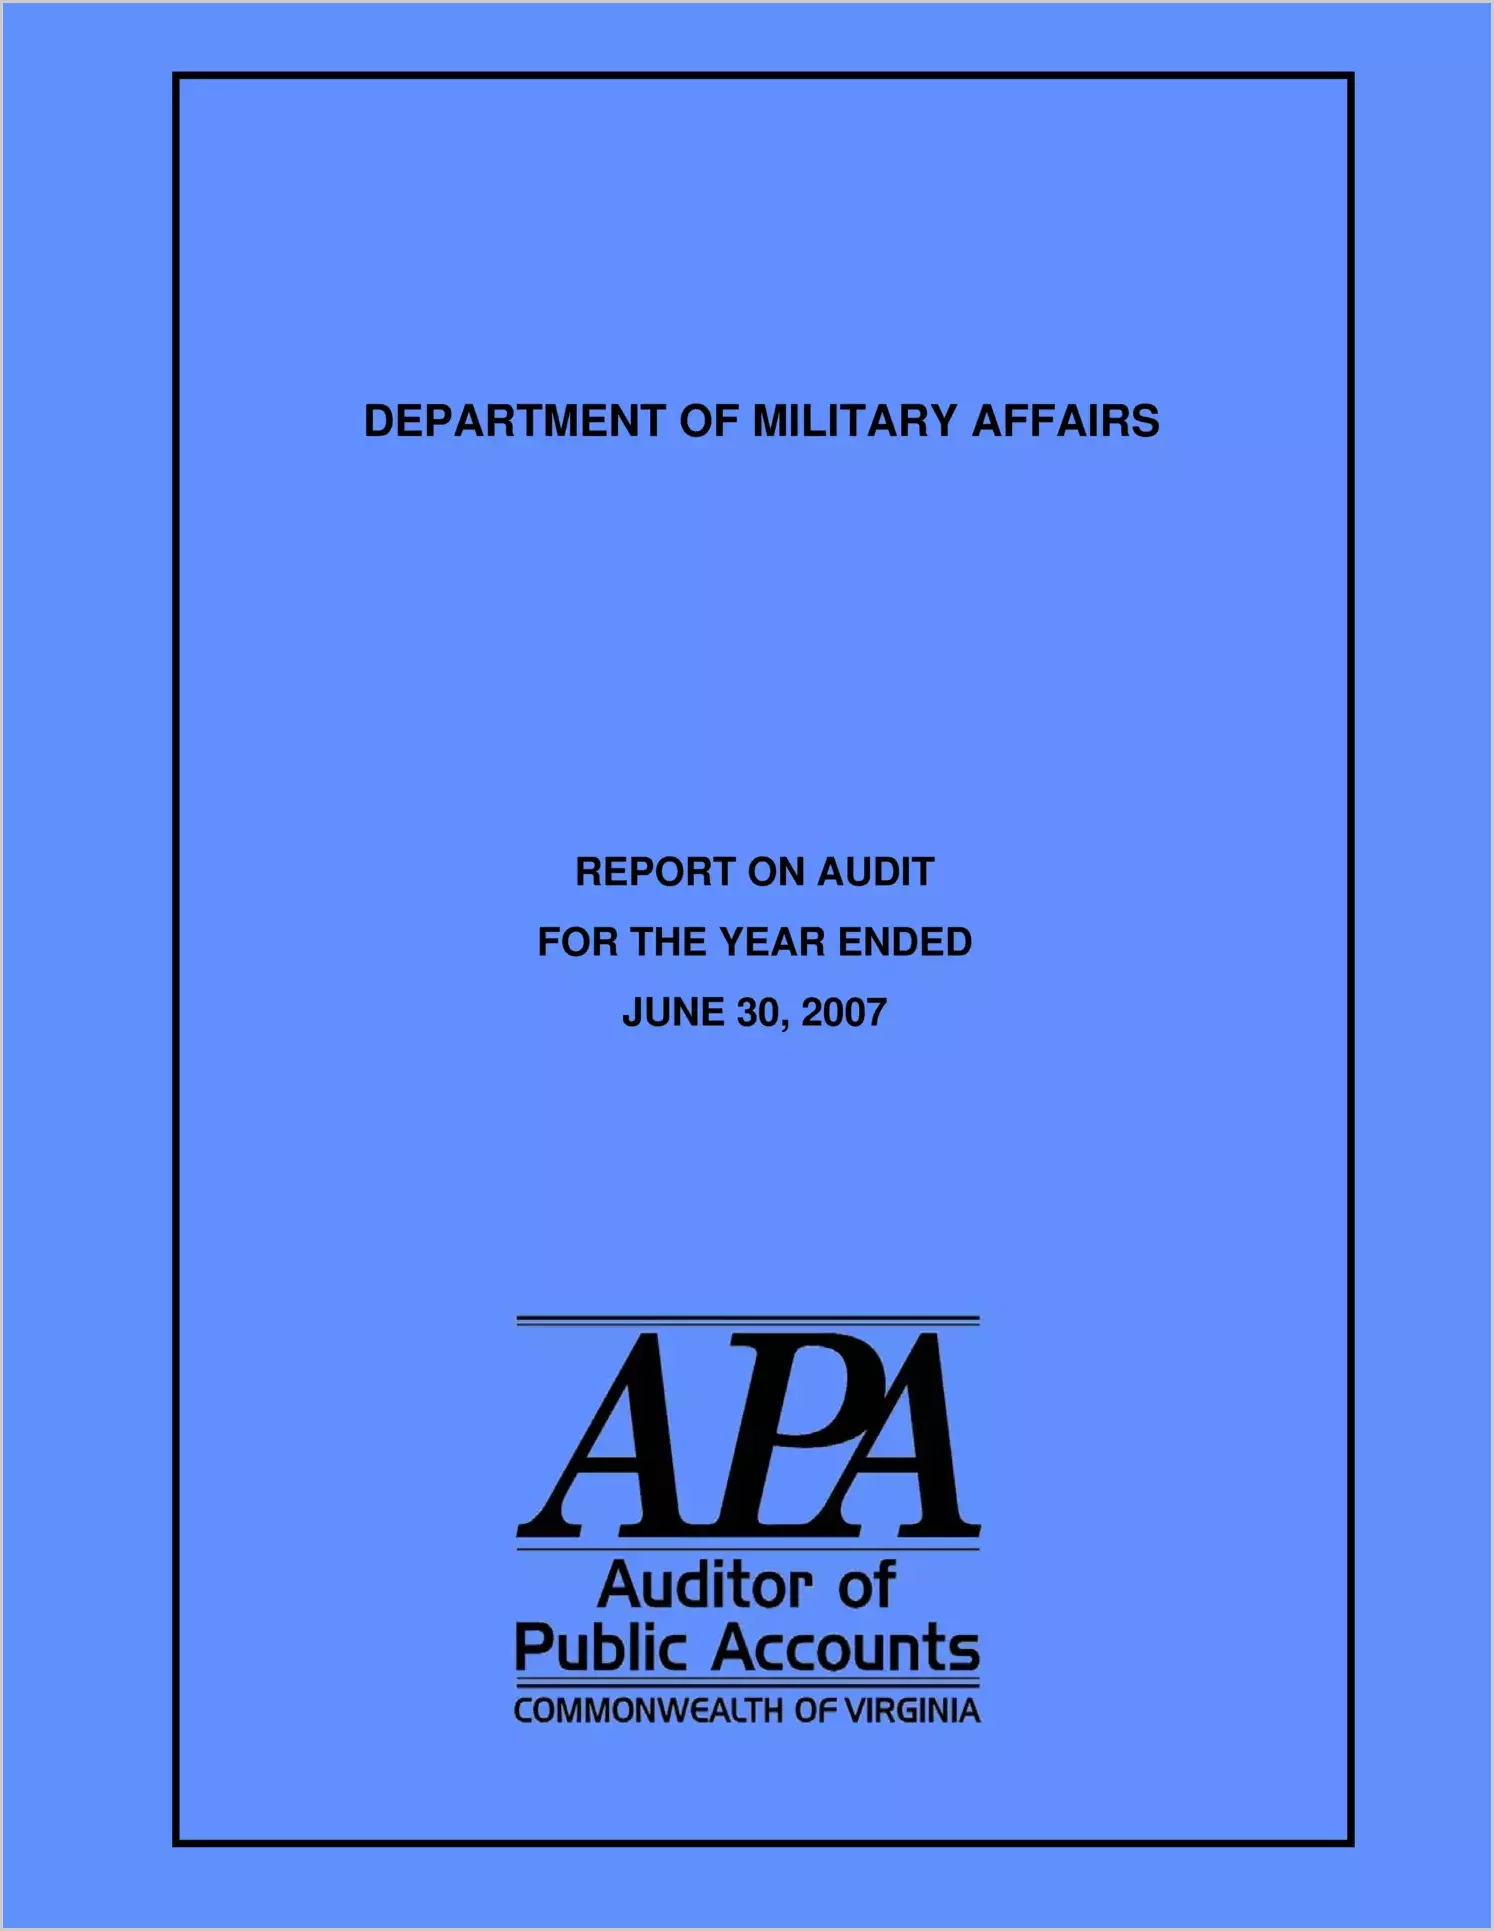 Department of Military Affairs report on audit for the year ended June 30, 2007